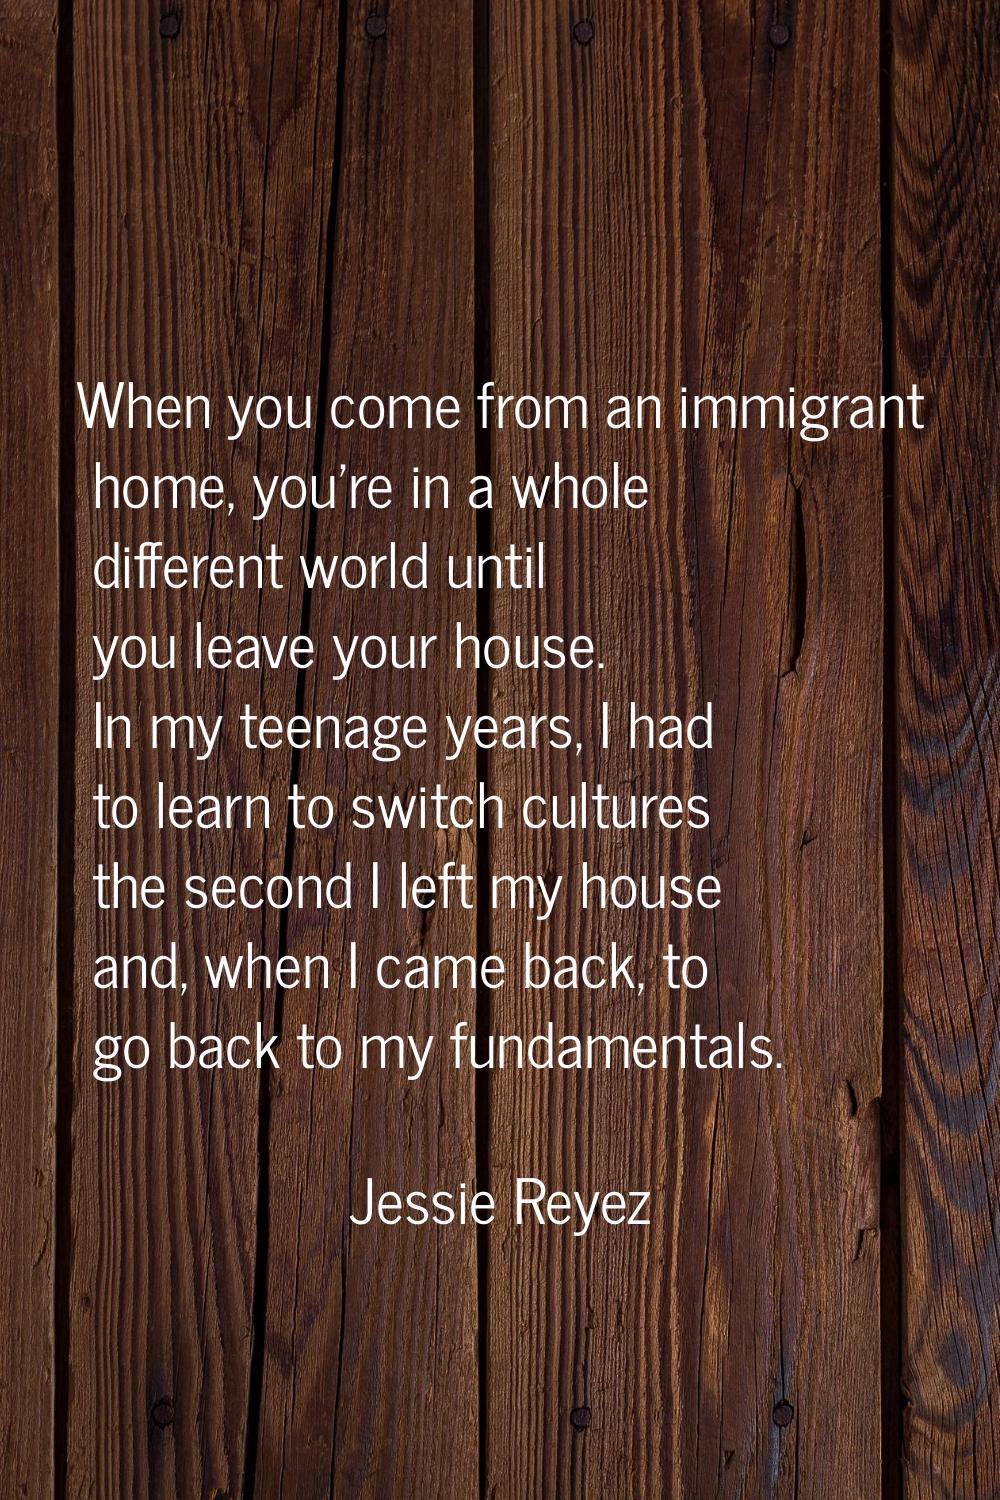 When you come from an immigrant home, you're in a whole different world until you leave your house.